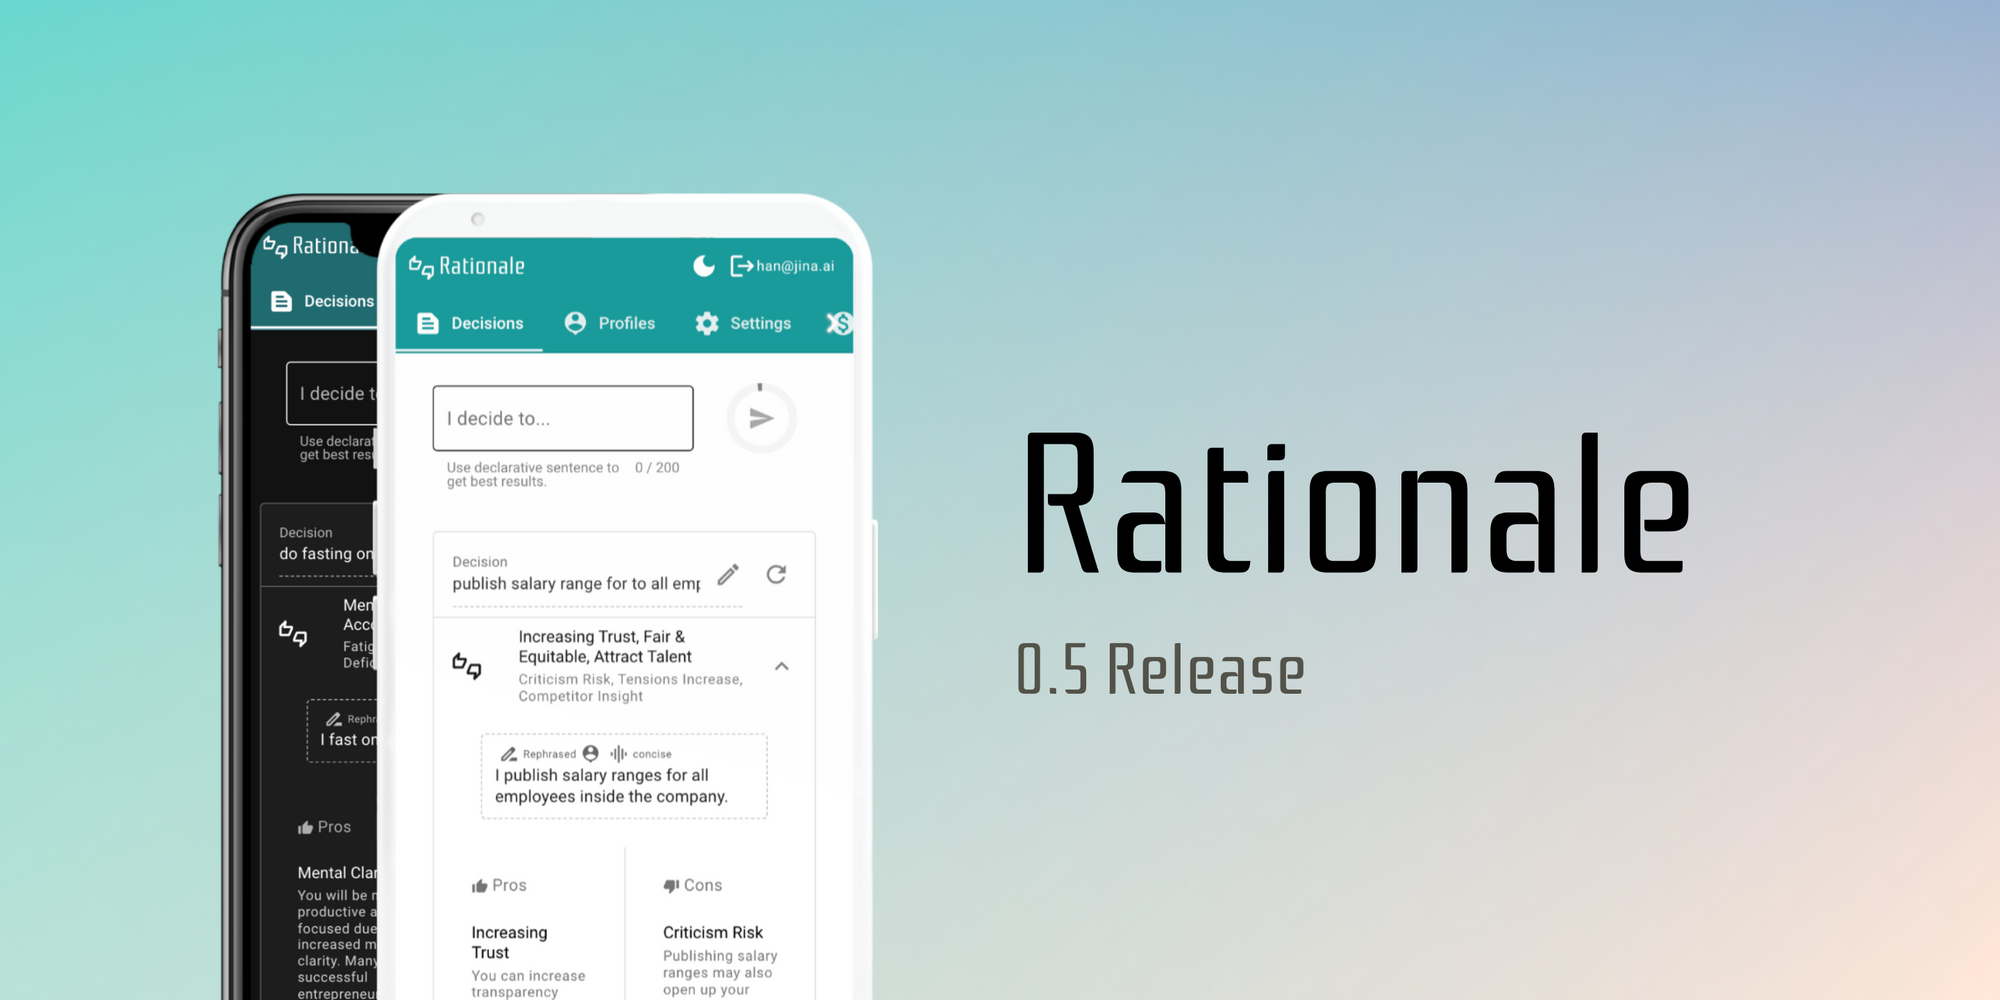 Promotional graphic for Rationale 0.5 Release featuring the app interface with decision-making features